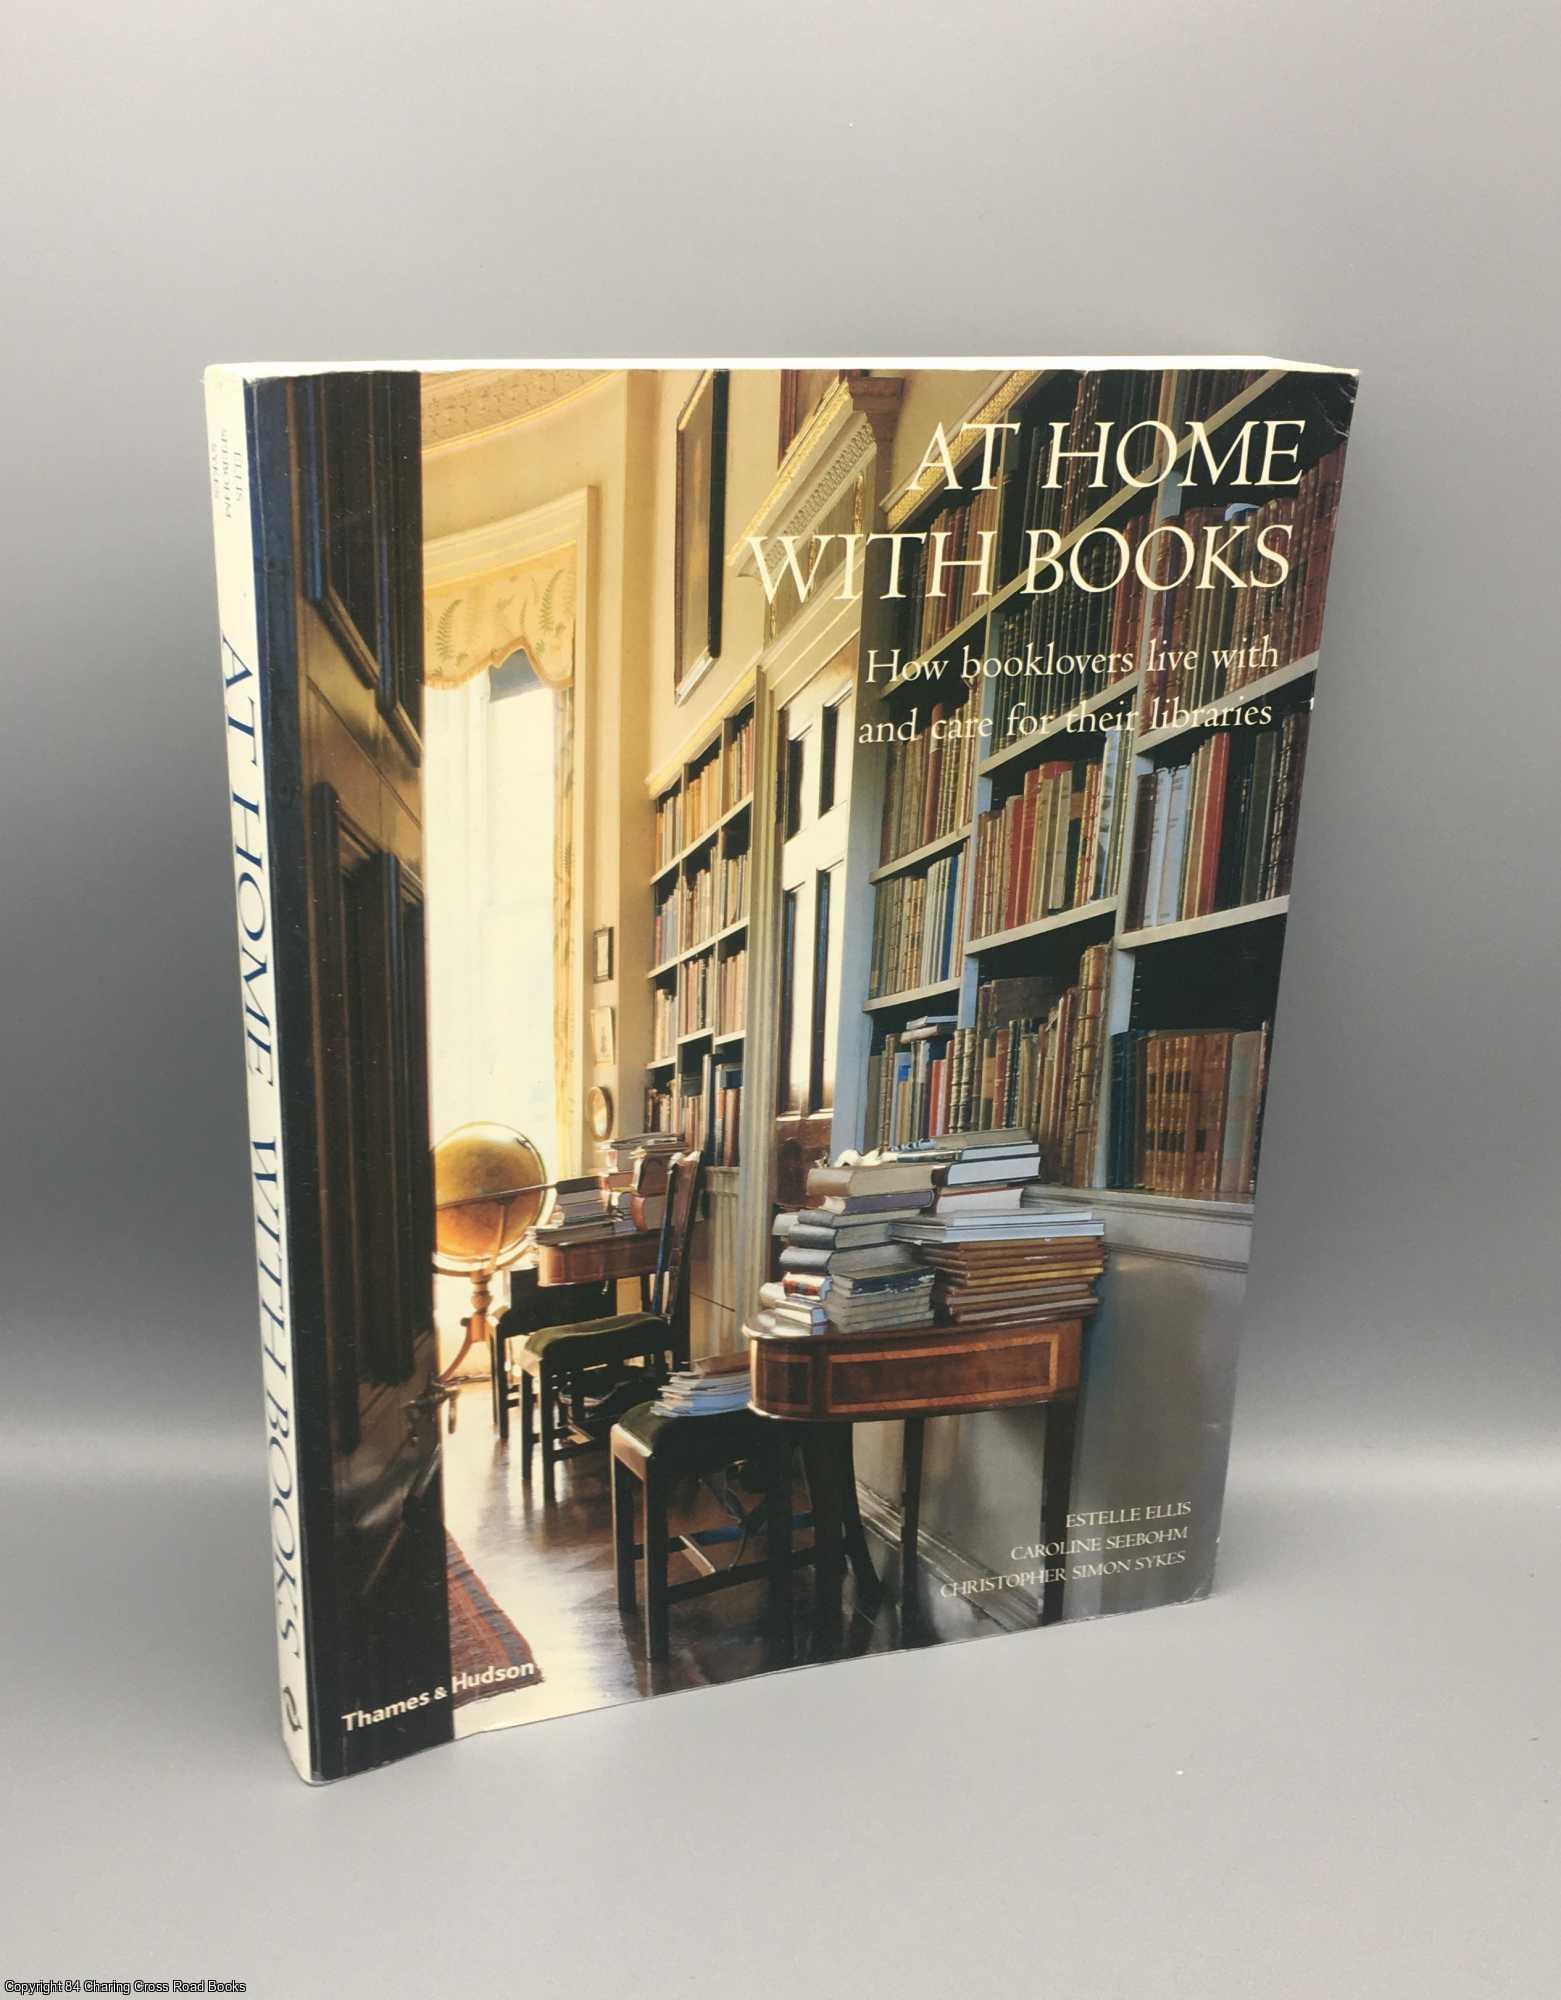 Ellis; Seebohm; Sykes - At Home with Books: How Booklovers Live with and Care for Their Libraries